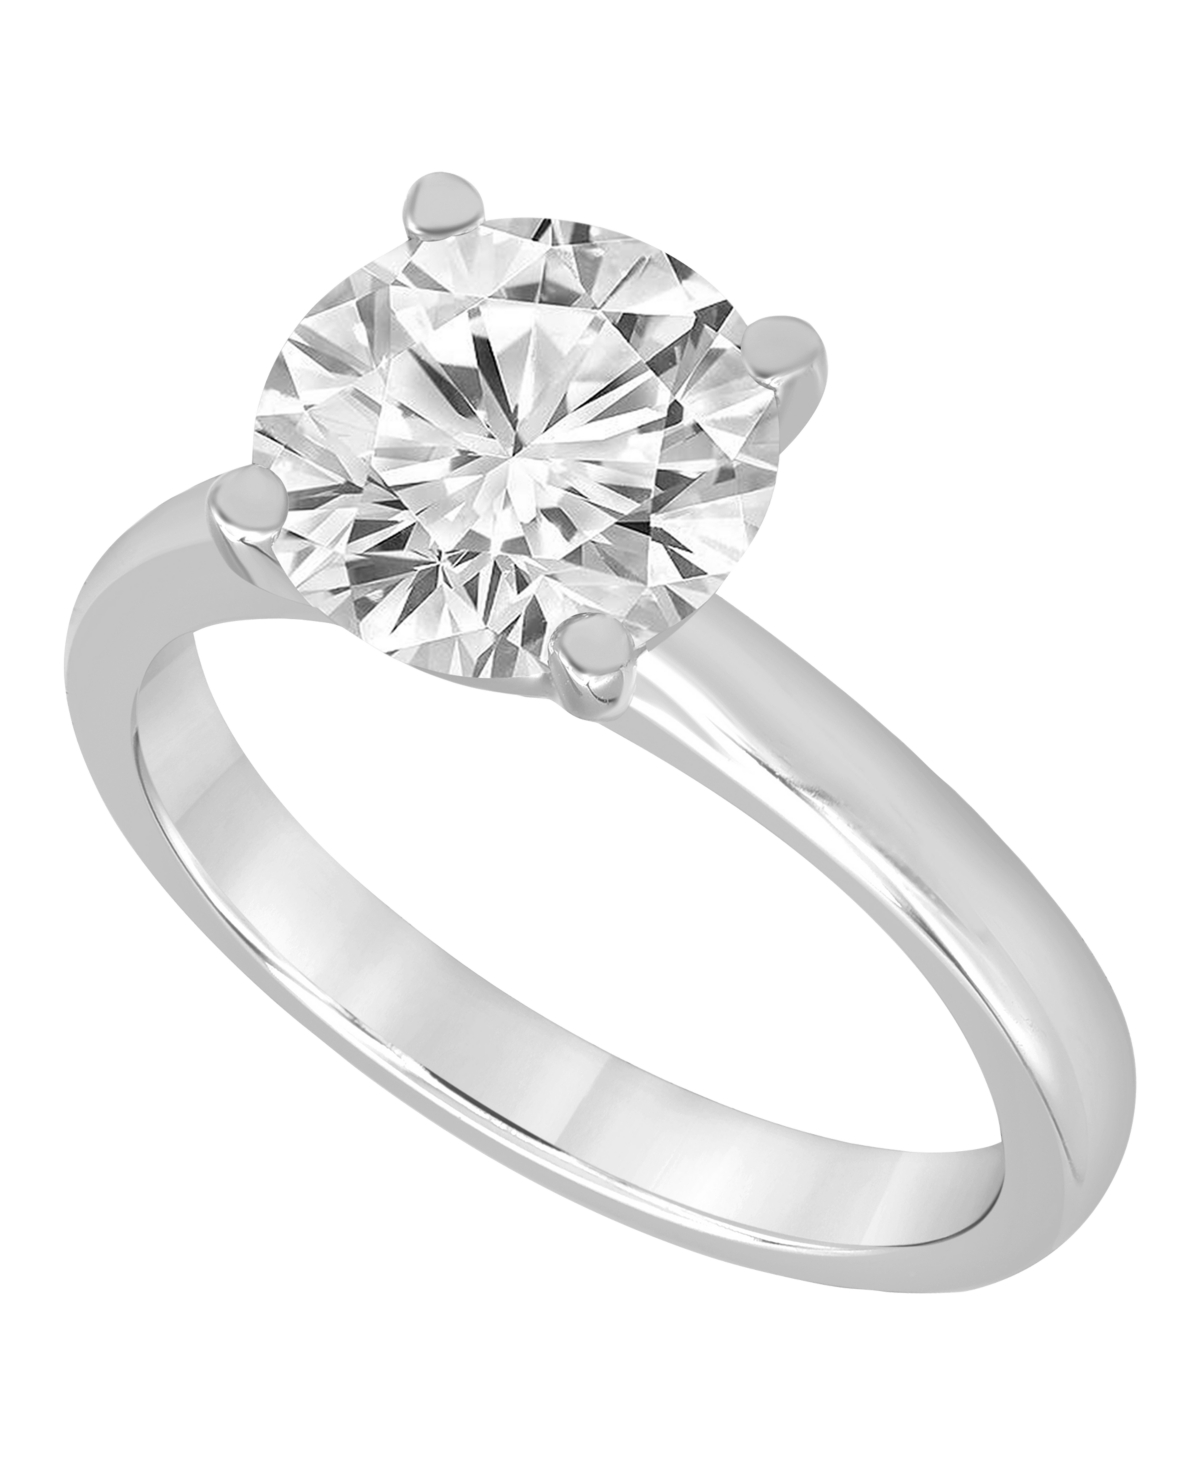 Certified Lab Grown Diamond Solitaire Engagement Ring (4 ct. t.w.) in 14k Gold - Yellow Gold